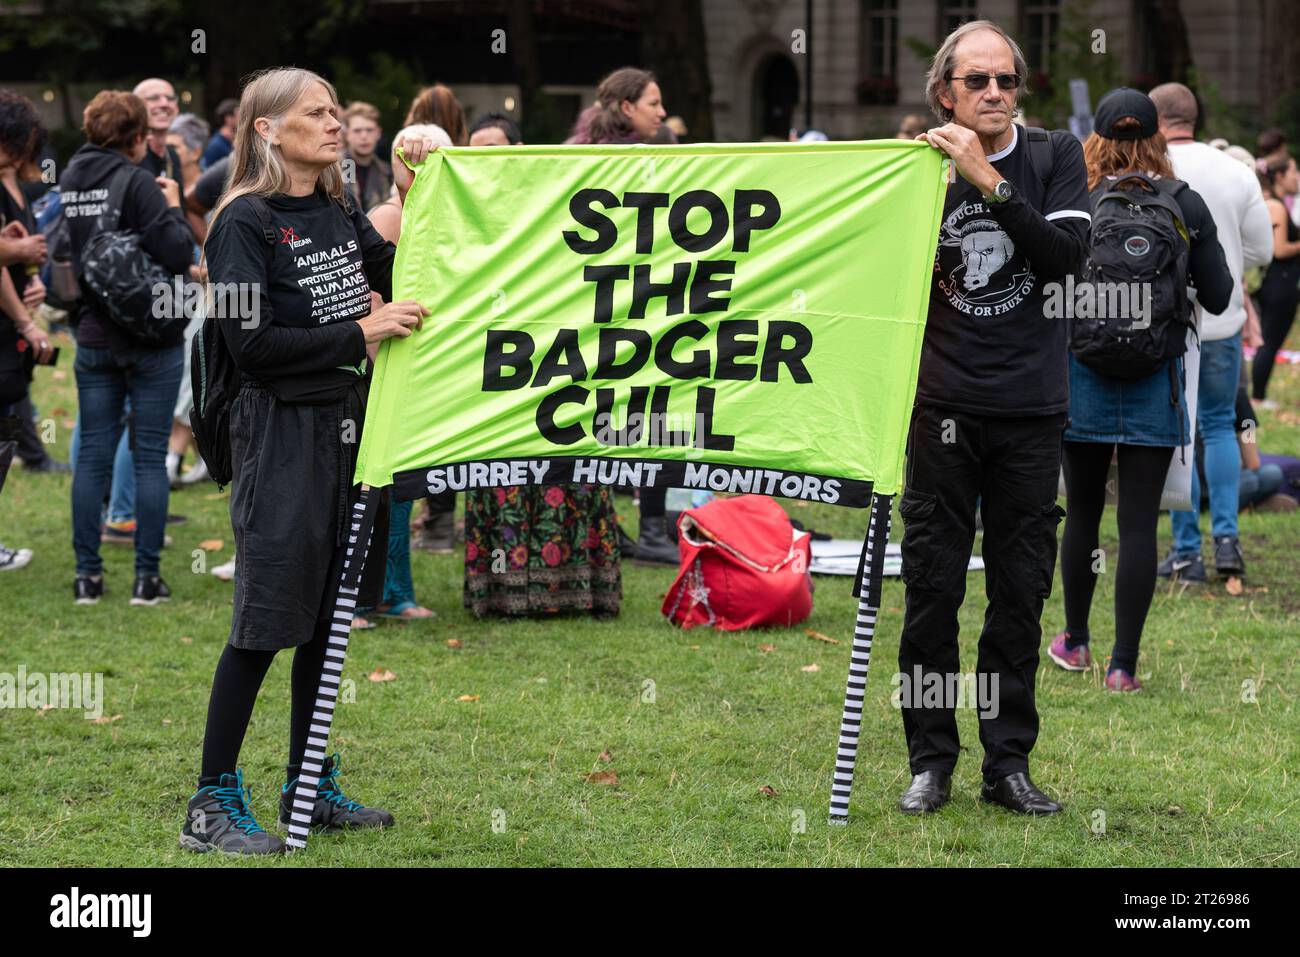 Stop the badger cull banner at official Animal Rights March taking place with protesters outside the Houses of Parliament. Surrey Hunt Monitors Stock Photo